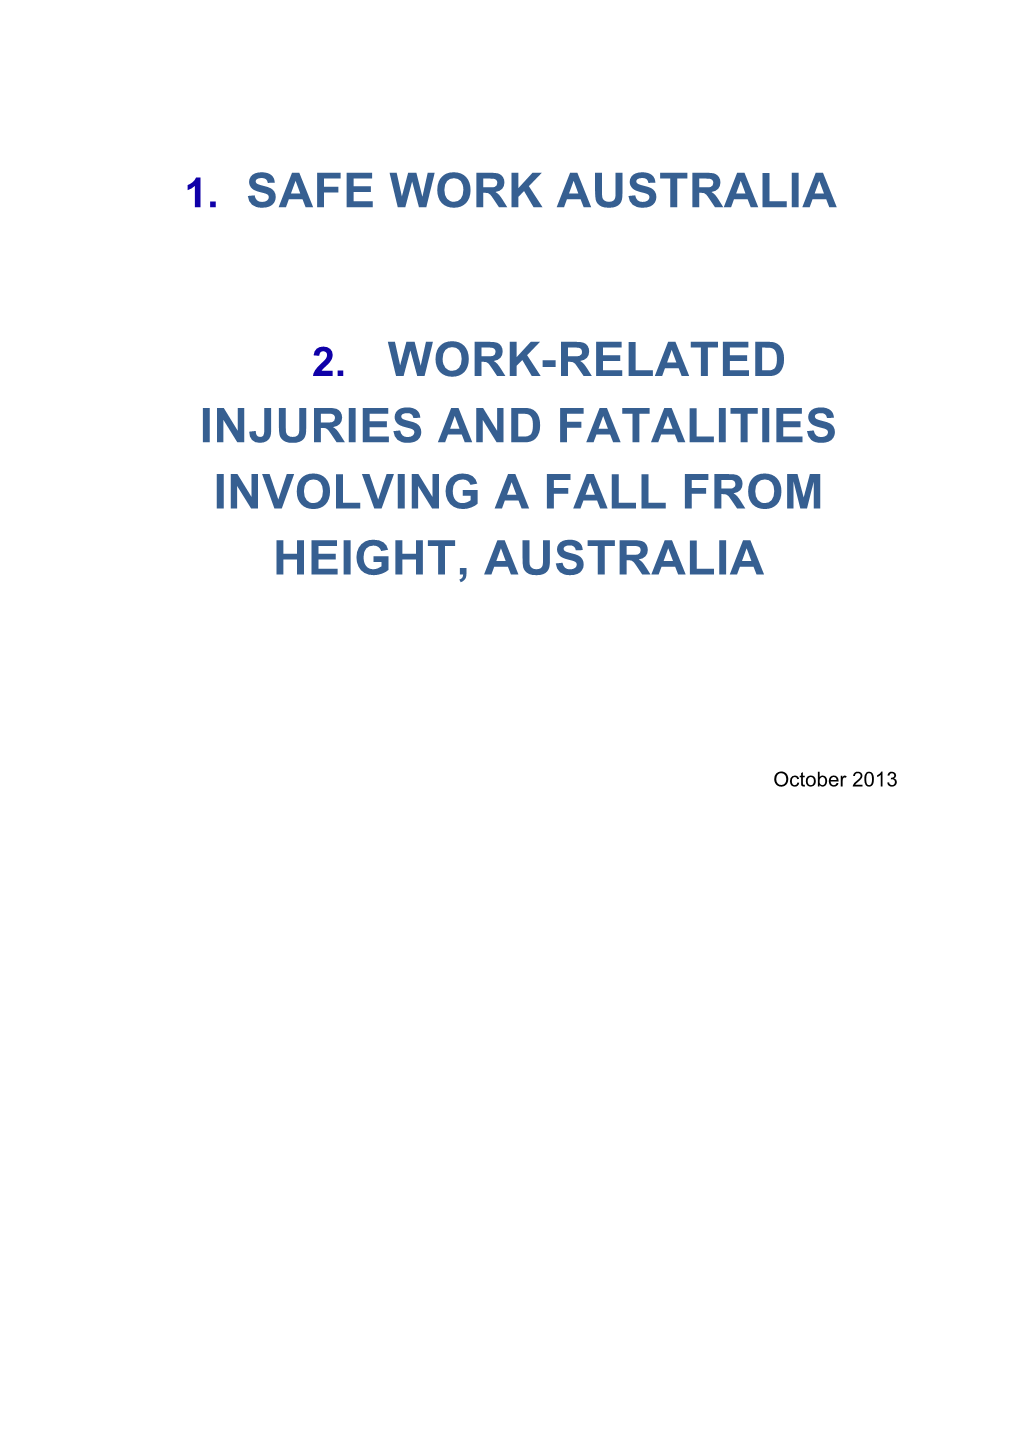 Work-Related Injuries and Fatalities Involving a Fall from Height, Australia